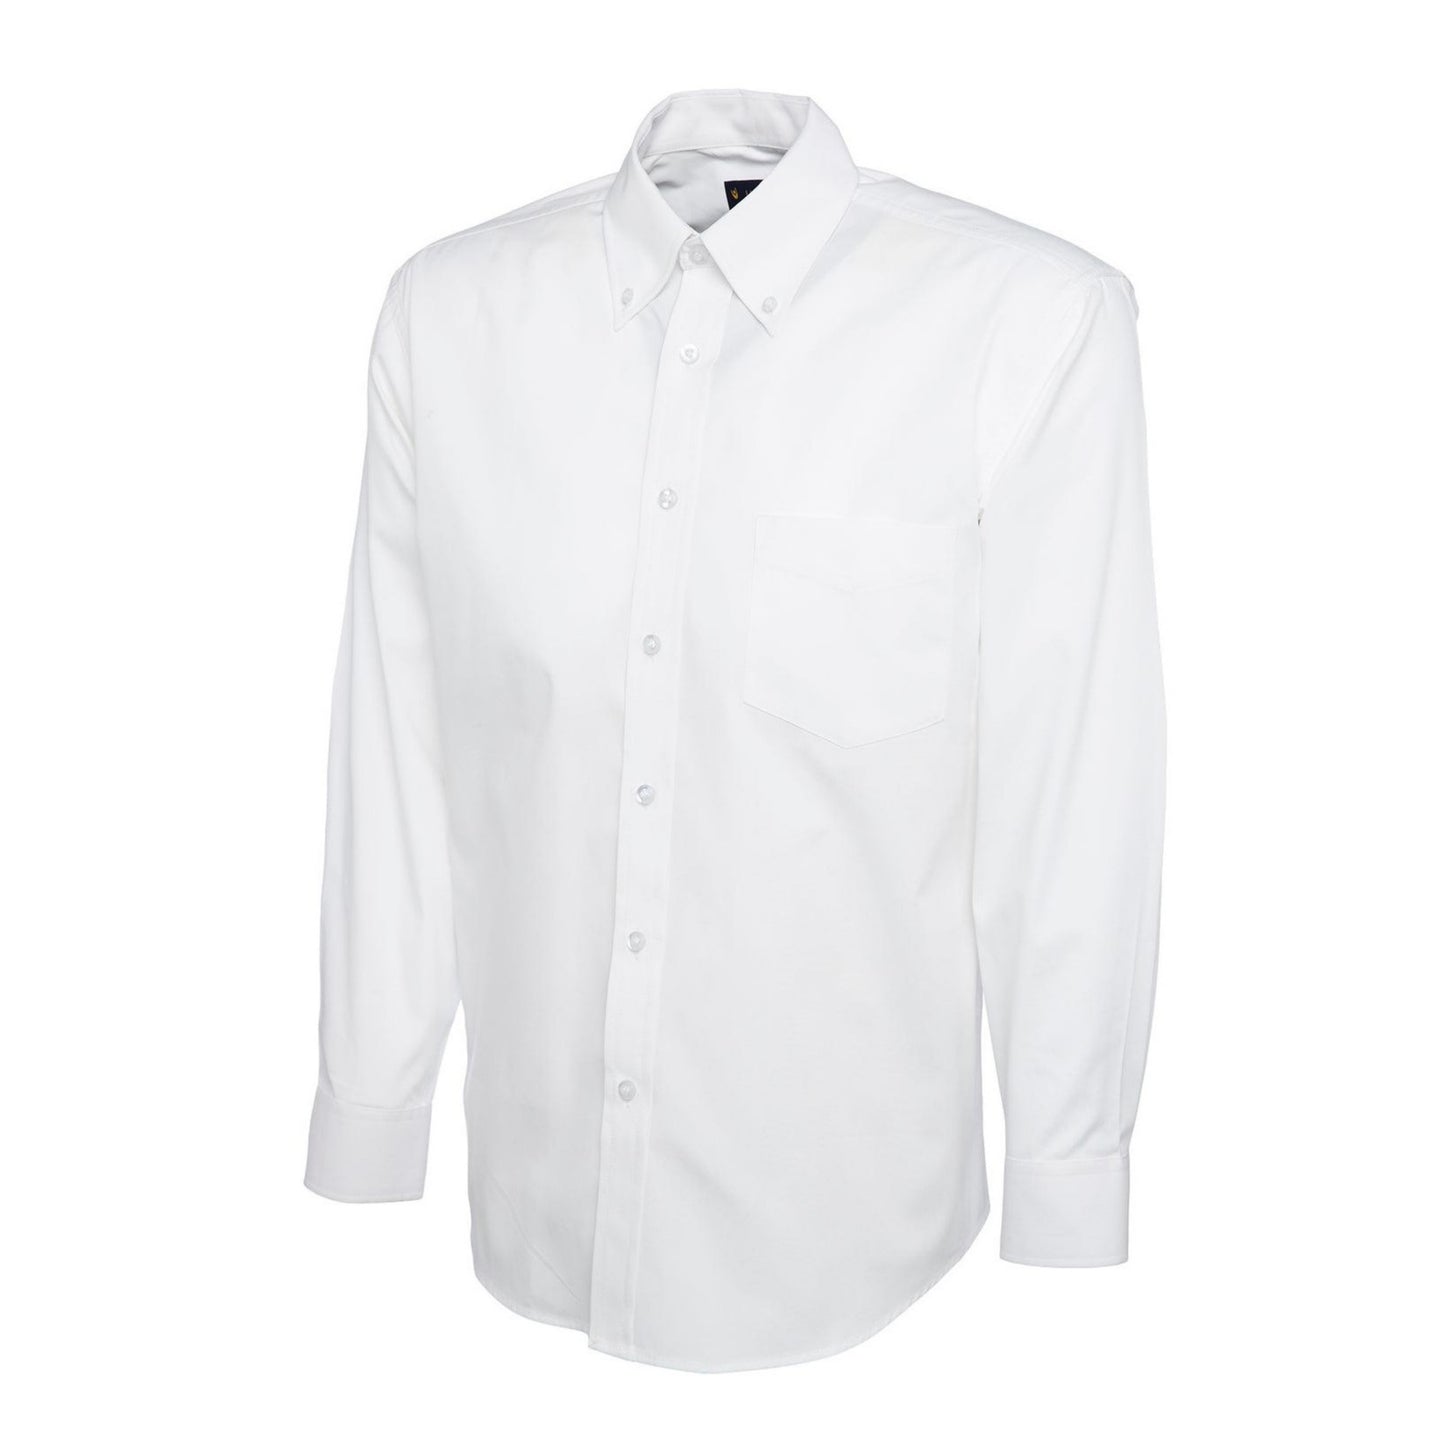 Men's Adaptive Clothing: Oxford Long Sleeve Shirt with Touch Close Fastenings - M201